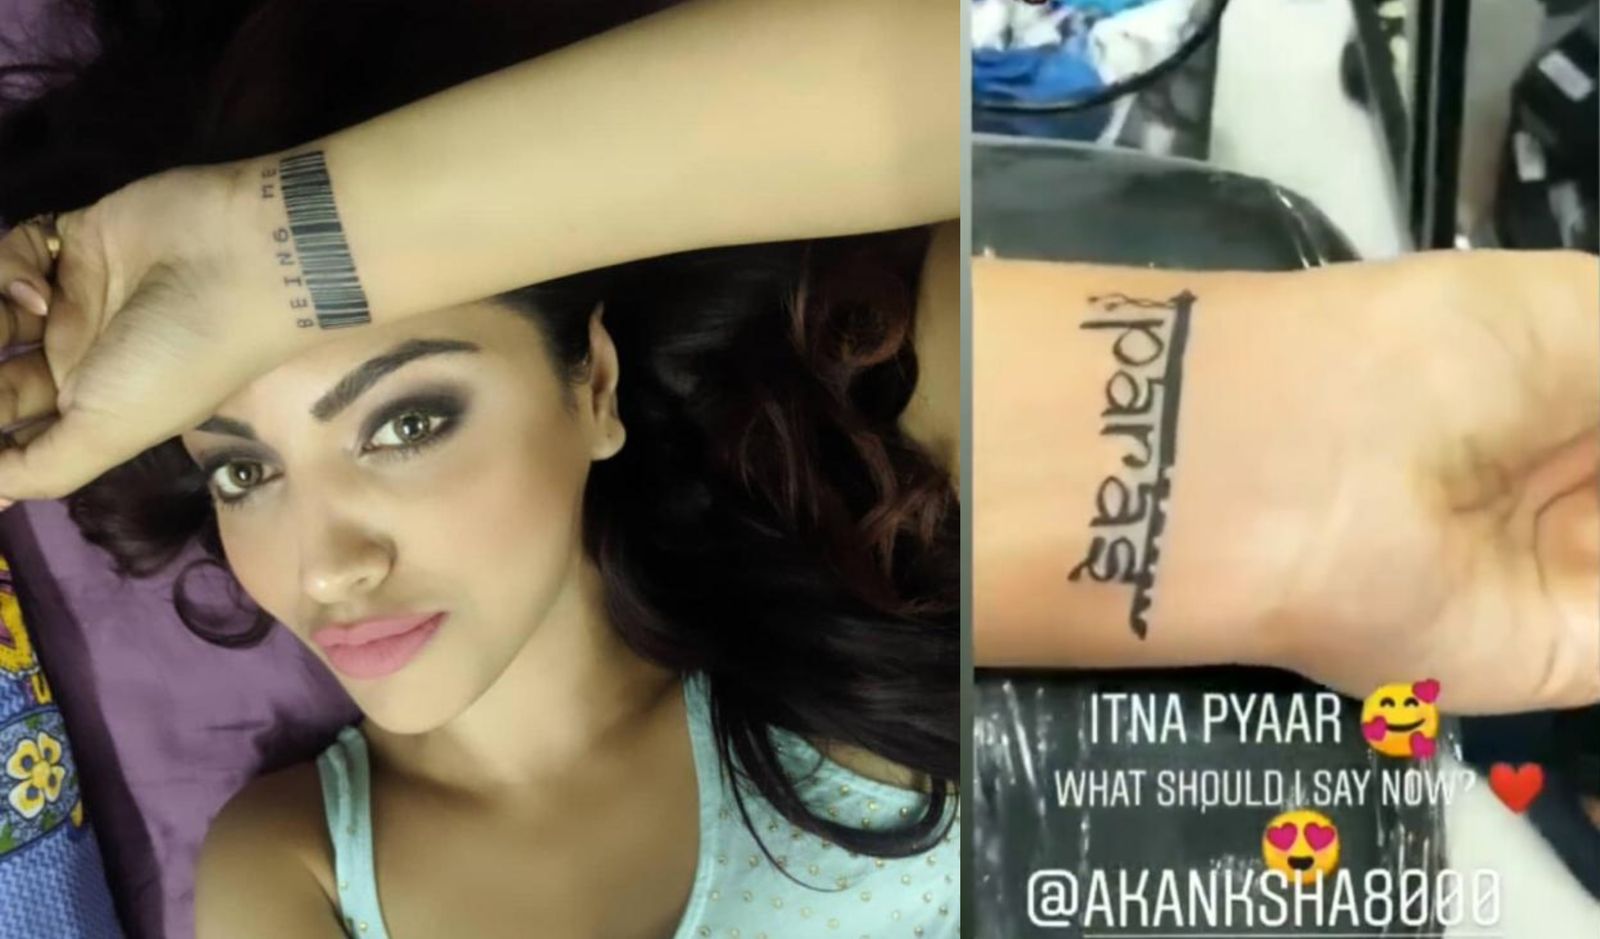 Akanksha Puri Removes Tattoo With Paras Chhabra's Name On Her Wrist, Gets One That Reads 'Being Me' Instead